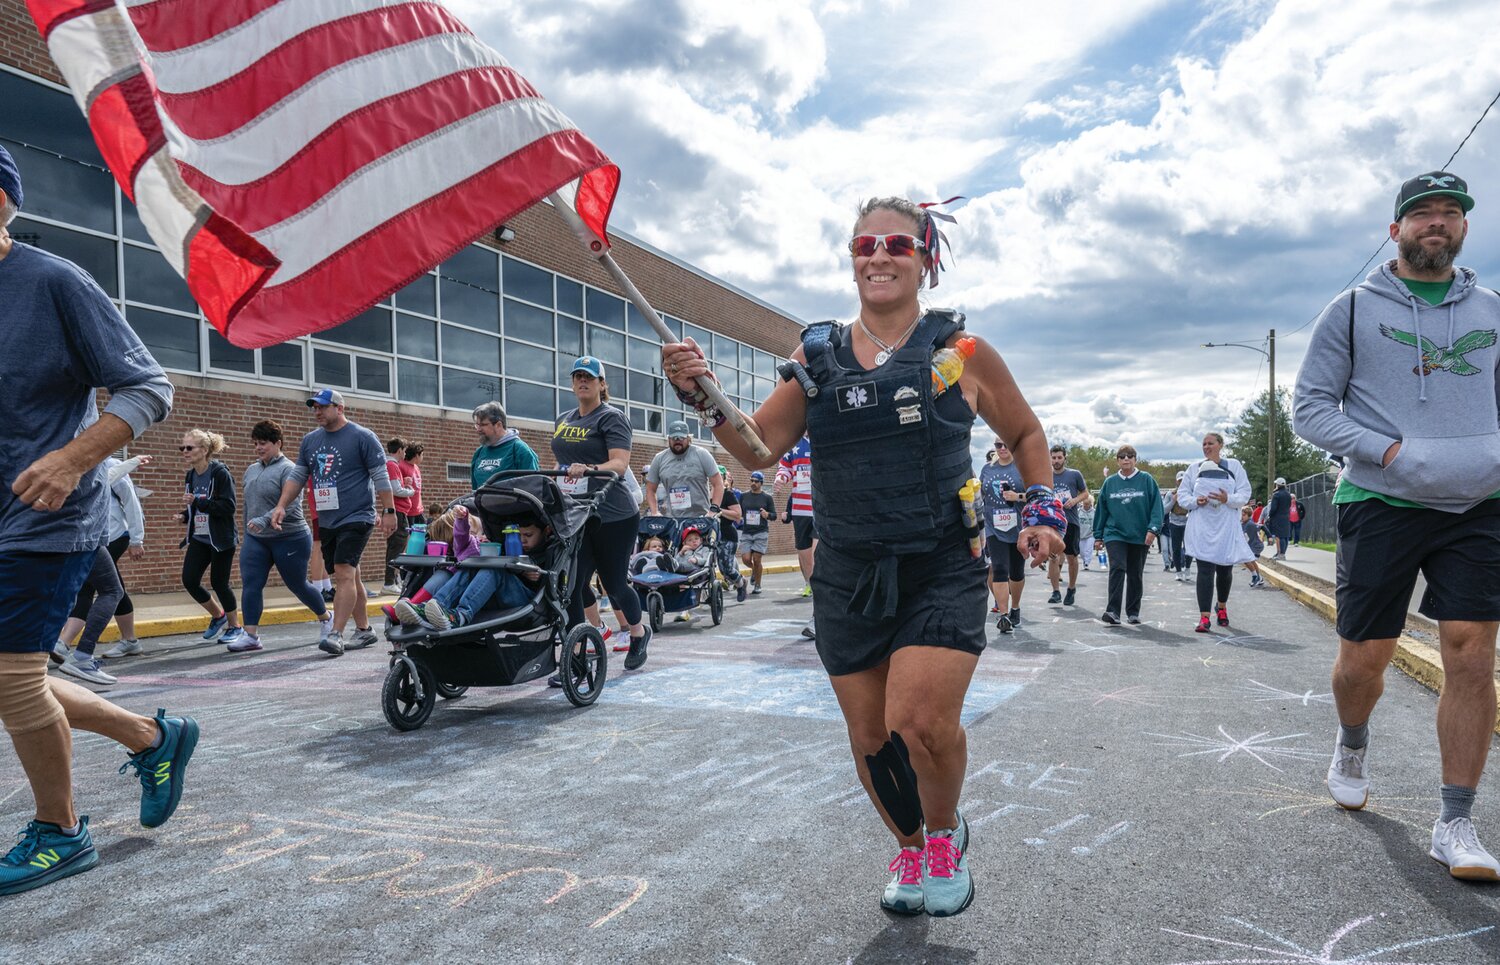 A runner waves the American flag while taking part in the Heroes Run.